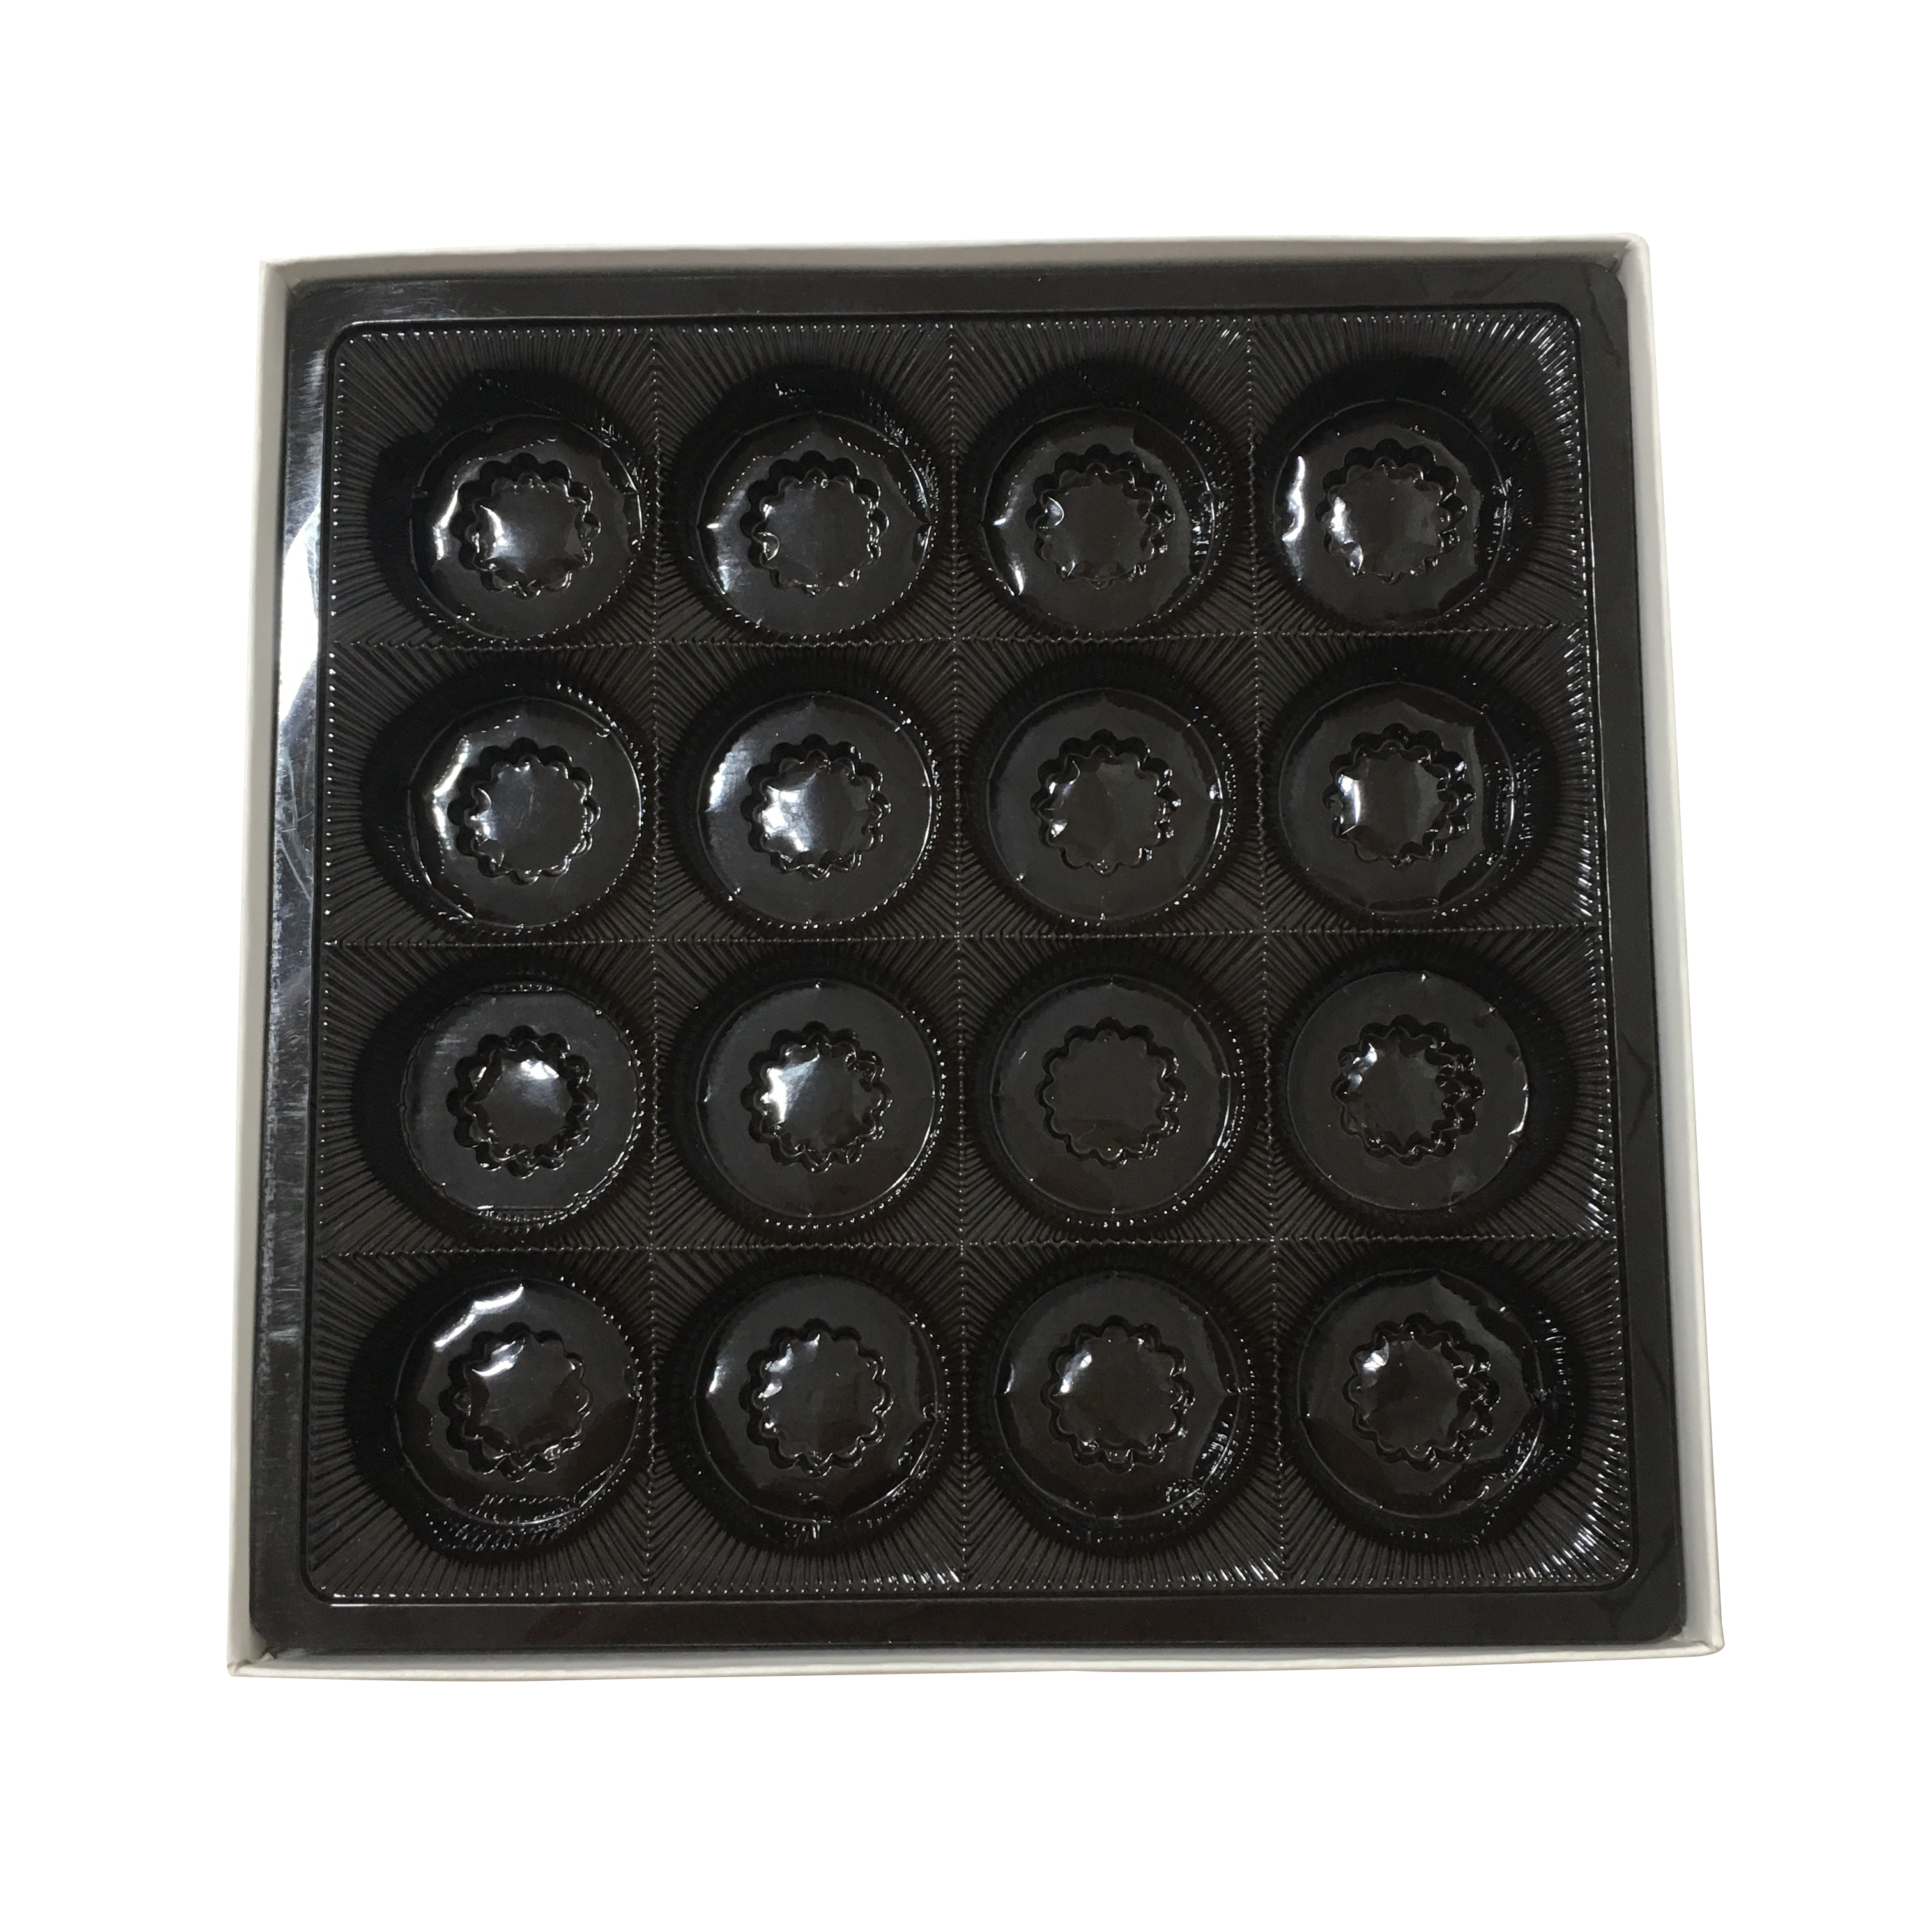 16 pcs load chocolate box self fold chocolate paper box cover and base chocolate box with plastic blister inner tray